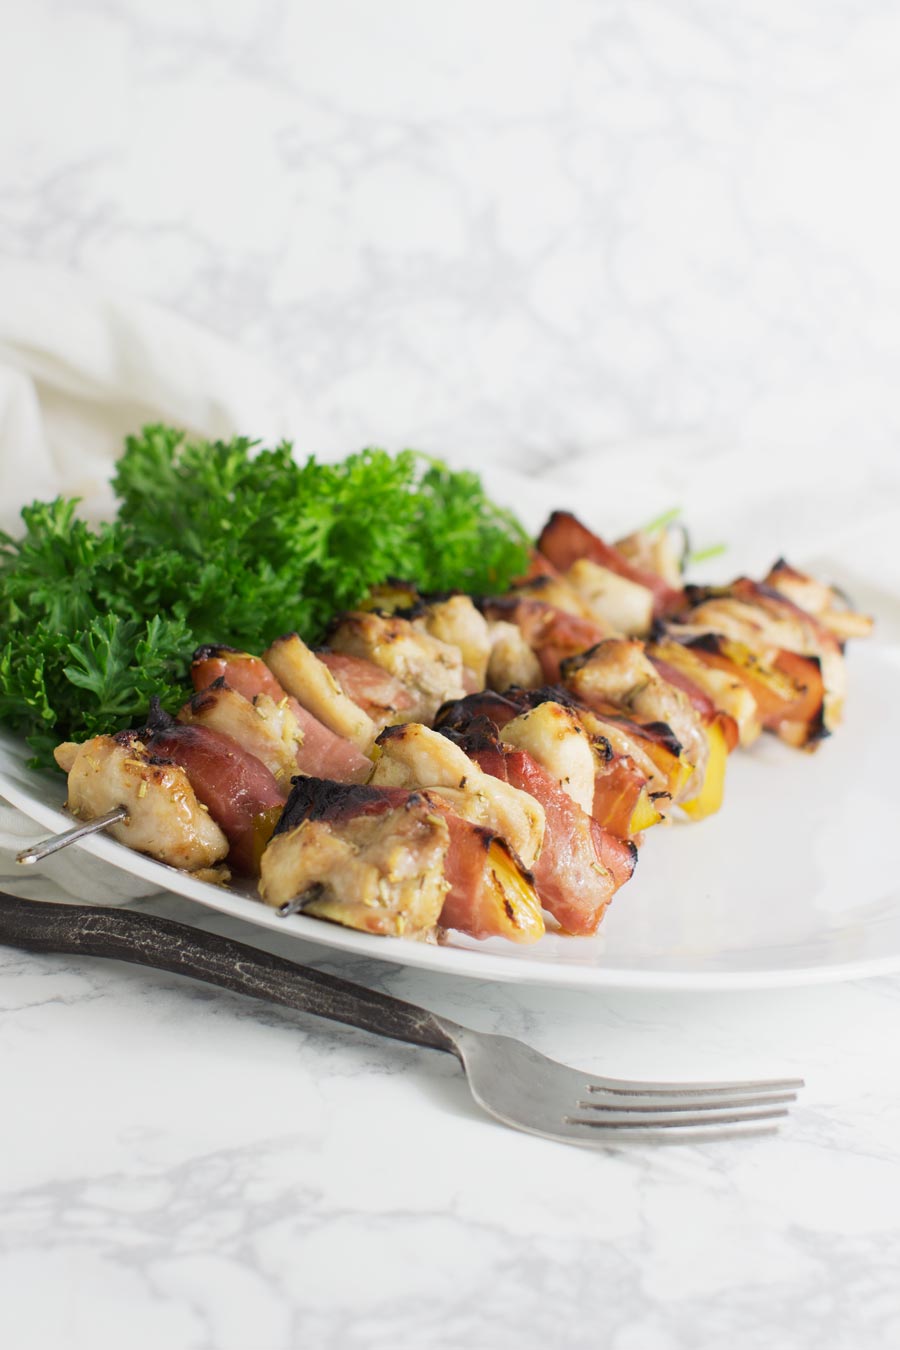 Chicken Kabobs with Prosciutto and Apricots recipe from acleanplate.com #paleo #aip #glutenfree